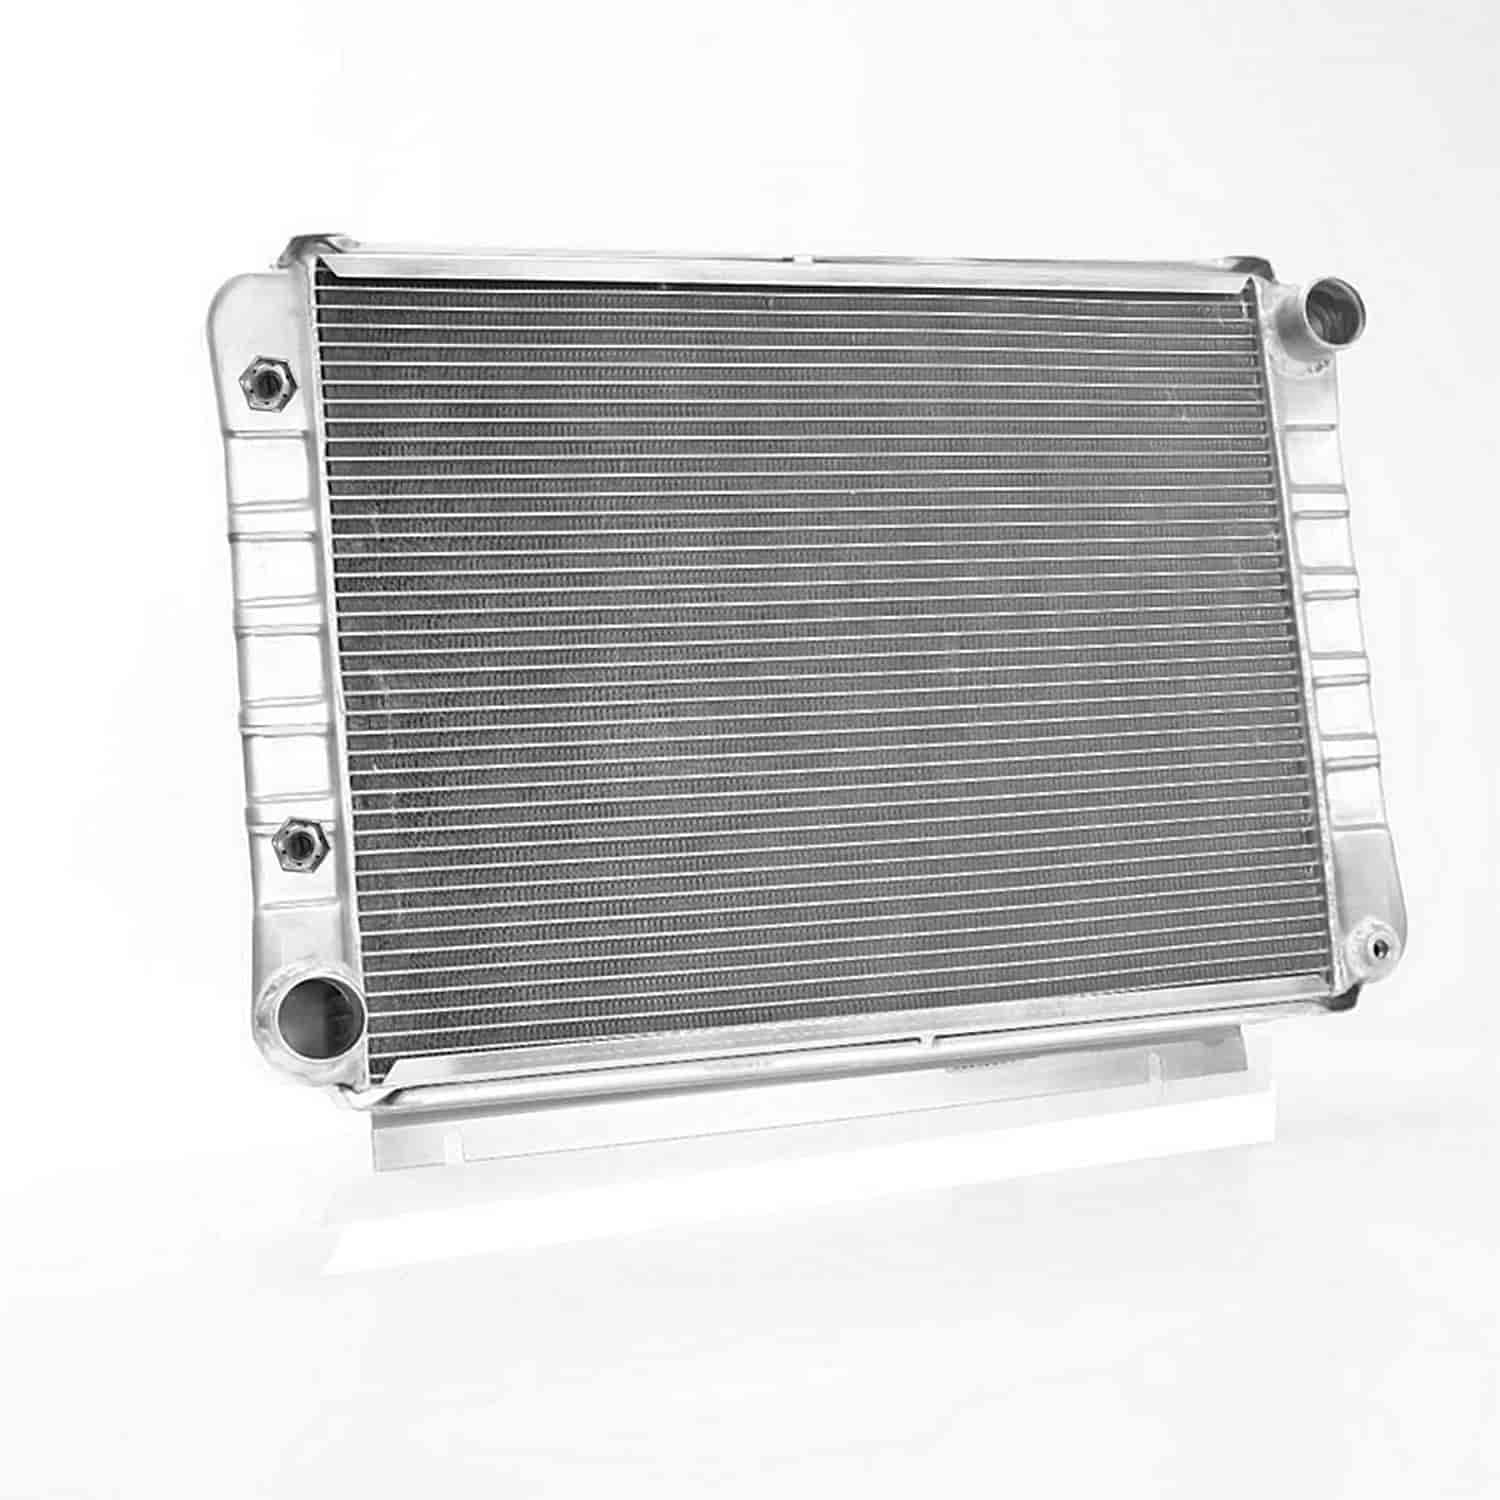 ExactFit Radiator for 1966 Thunderbird with Late Small